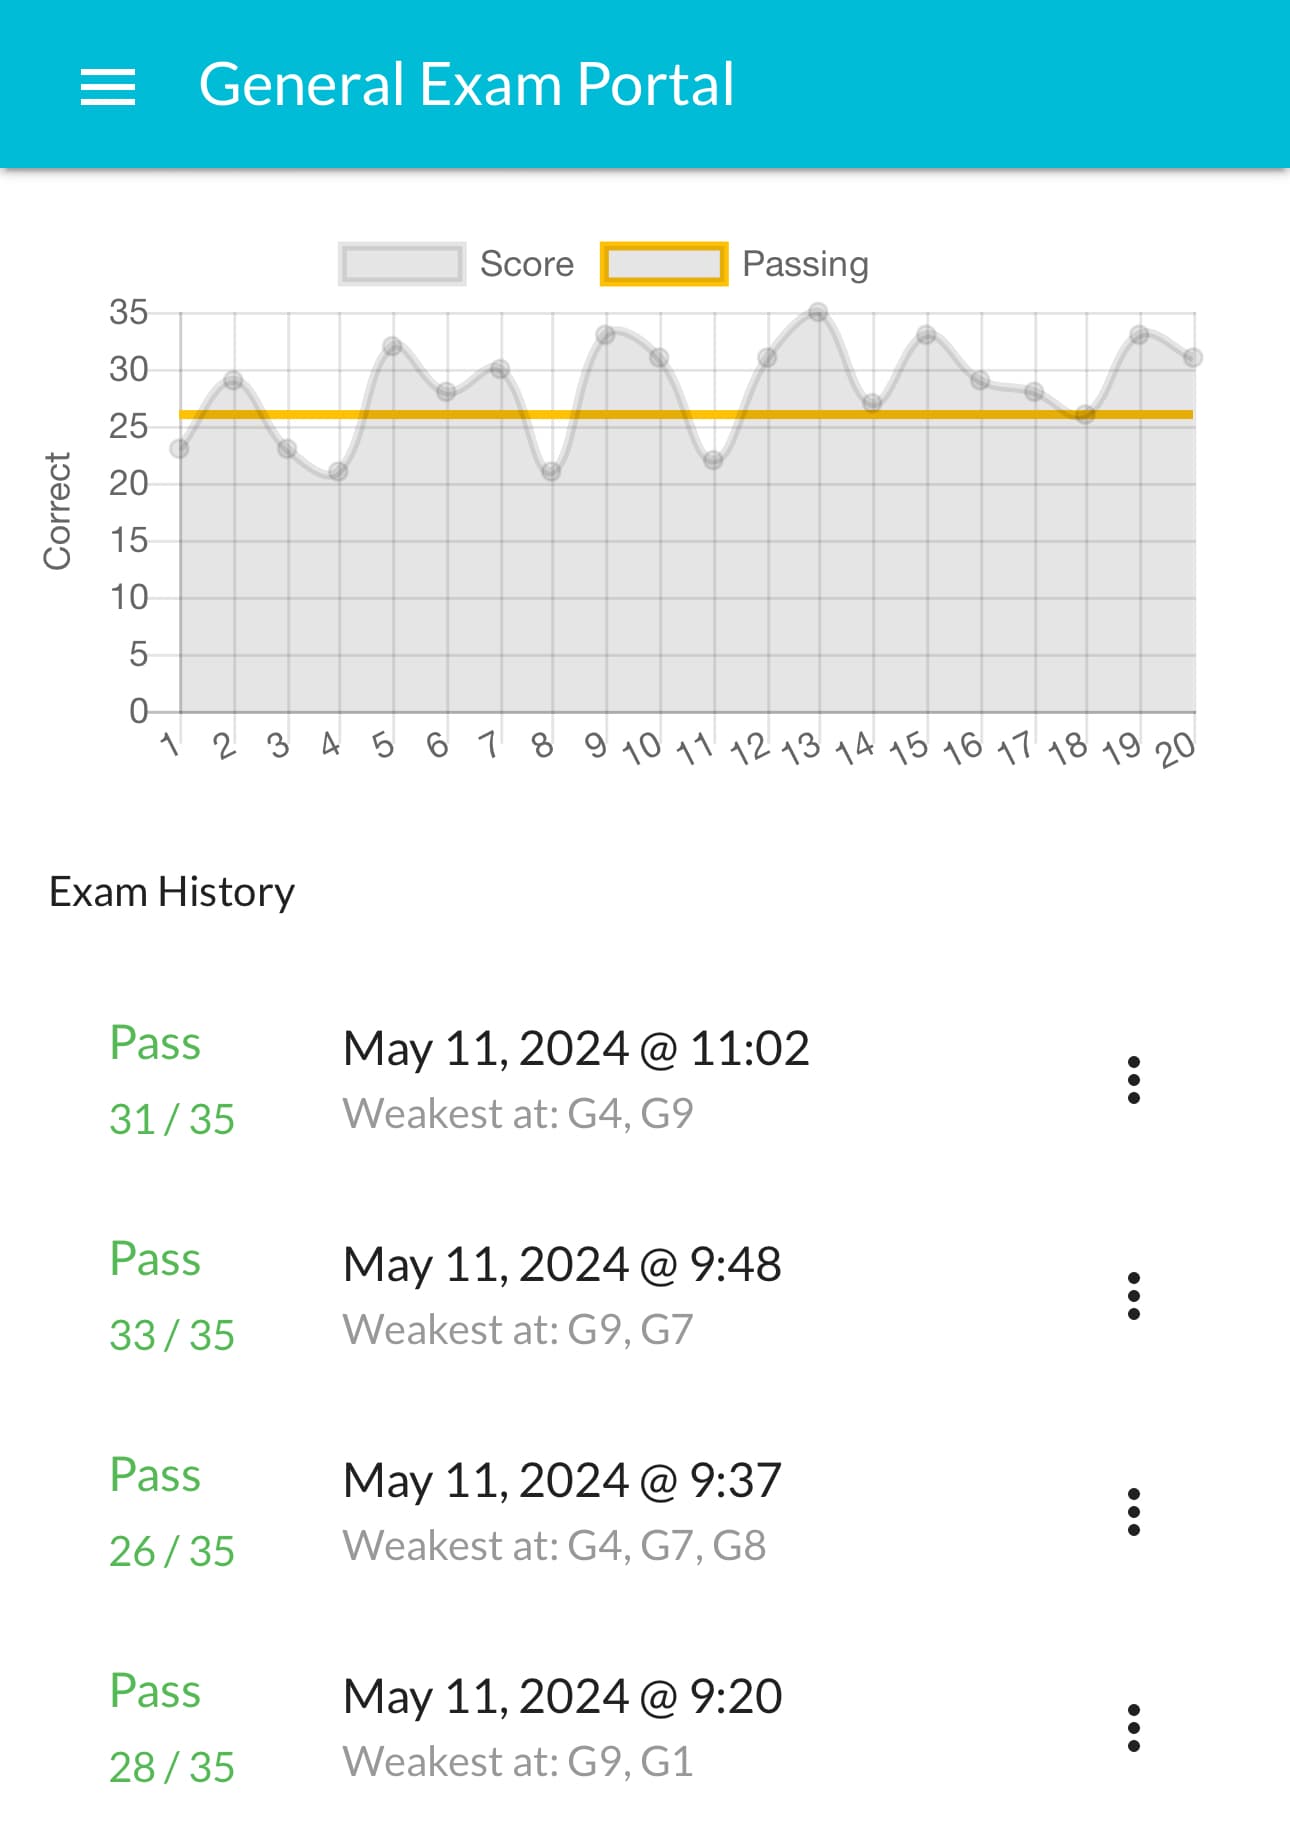 Screenshot of the General Exam Portal page. A chart at the top shows my score over time, with an orange line showing the passing grade. Below is an exam history section showing my score and weakest areas for different attempts.